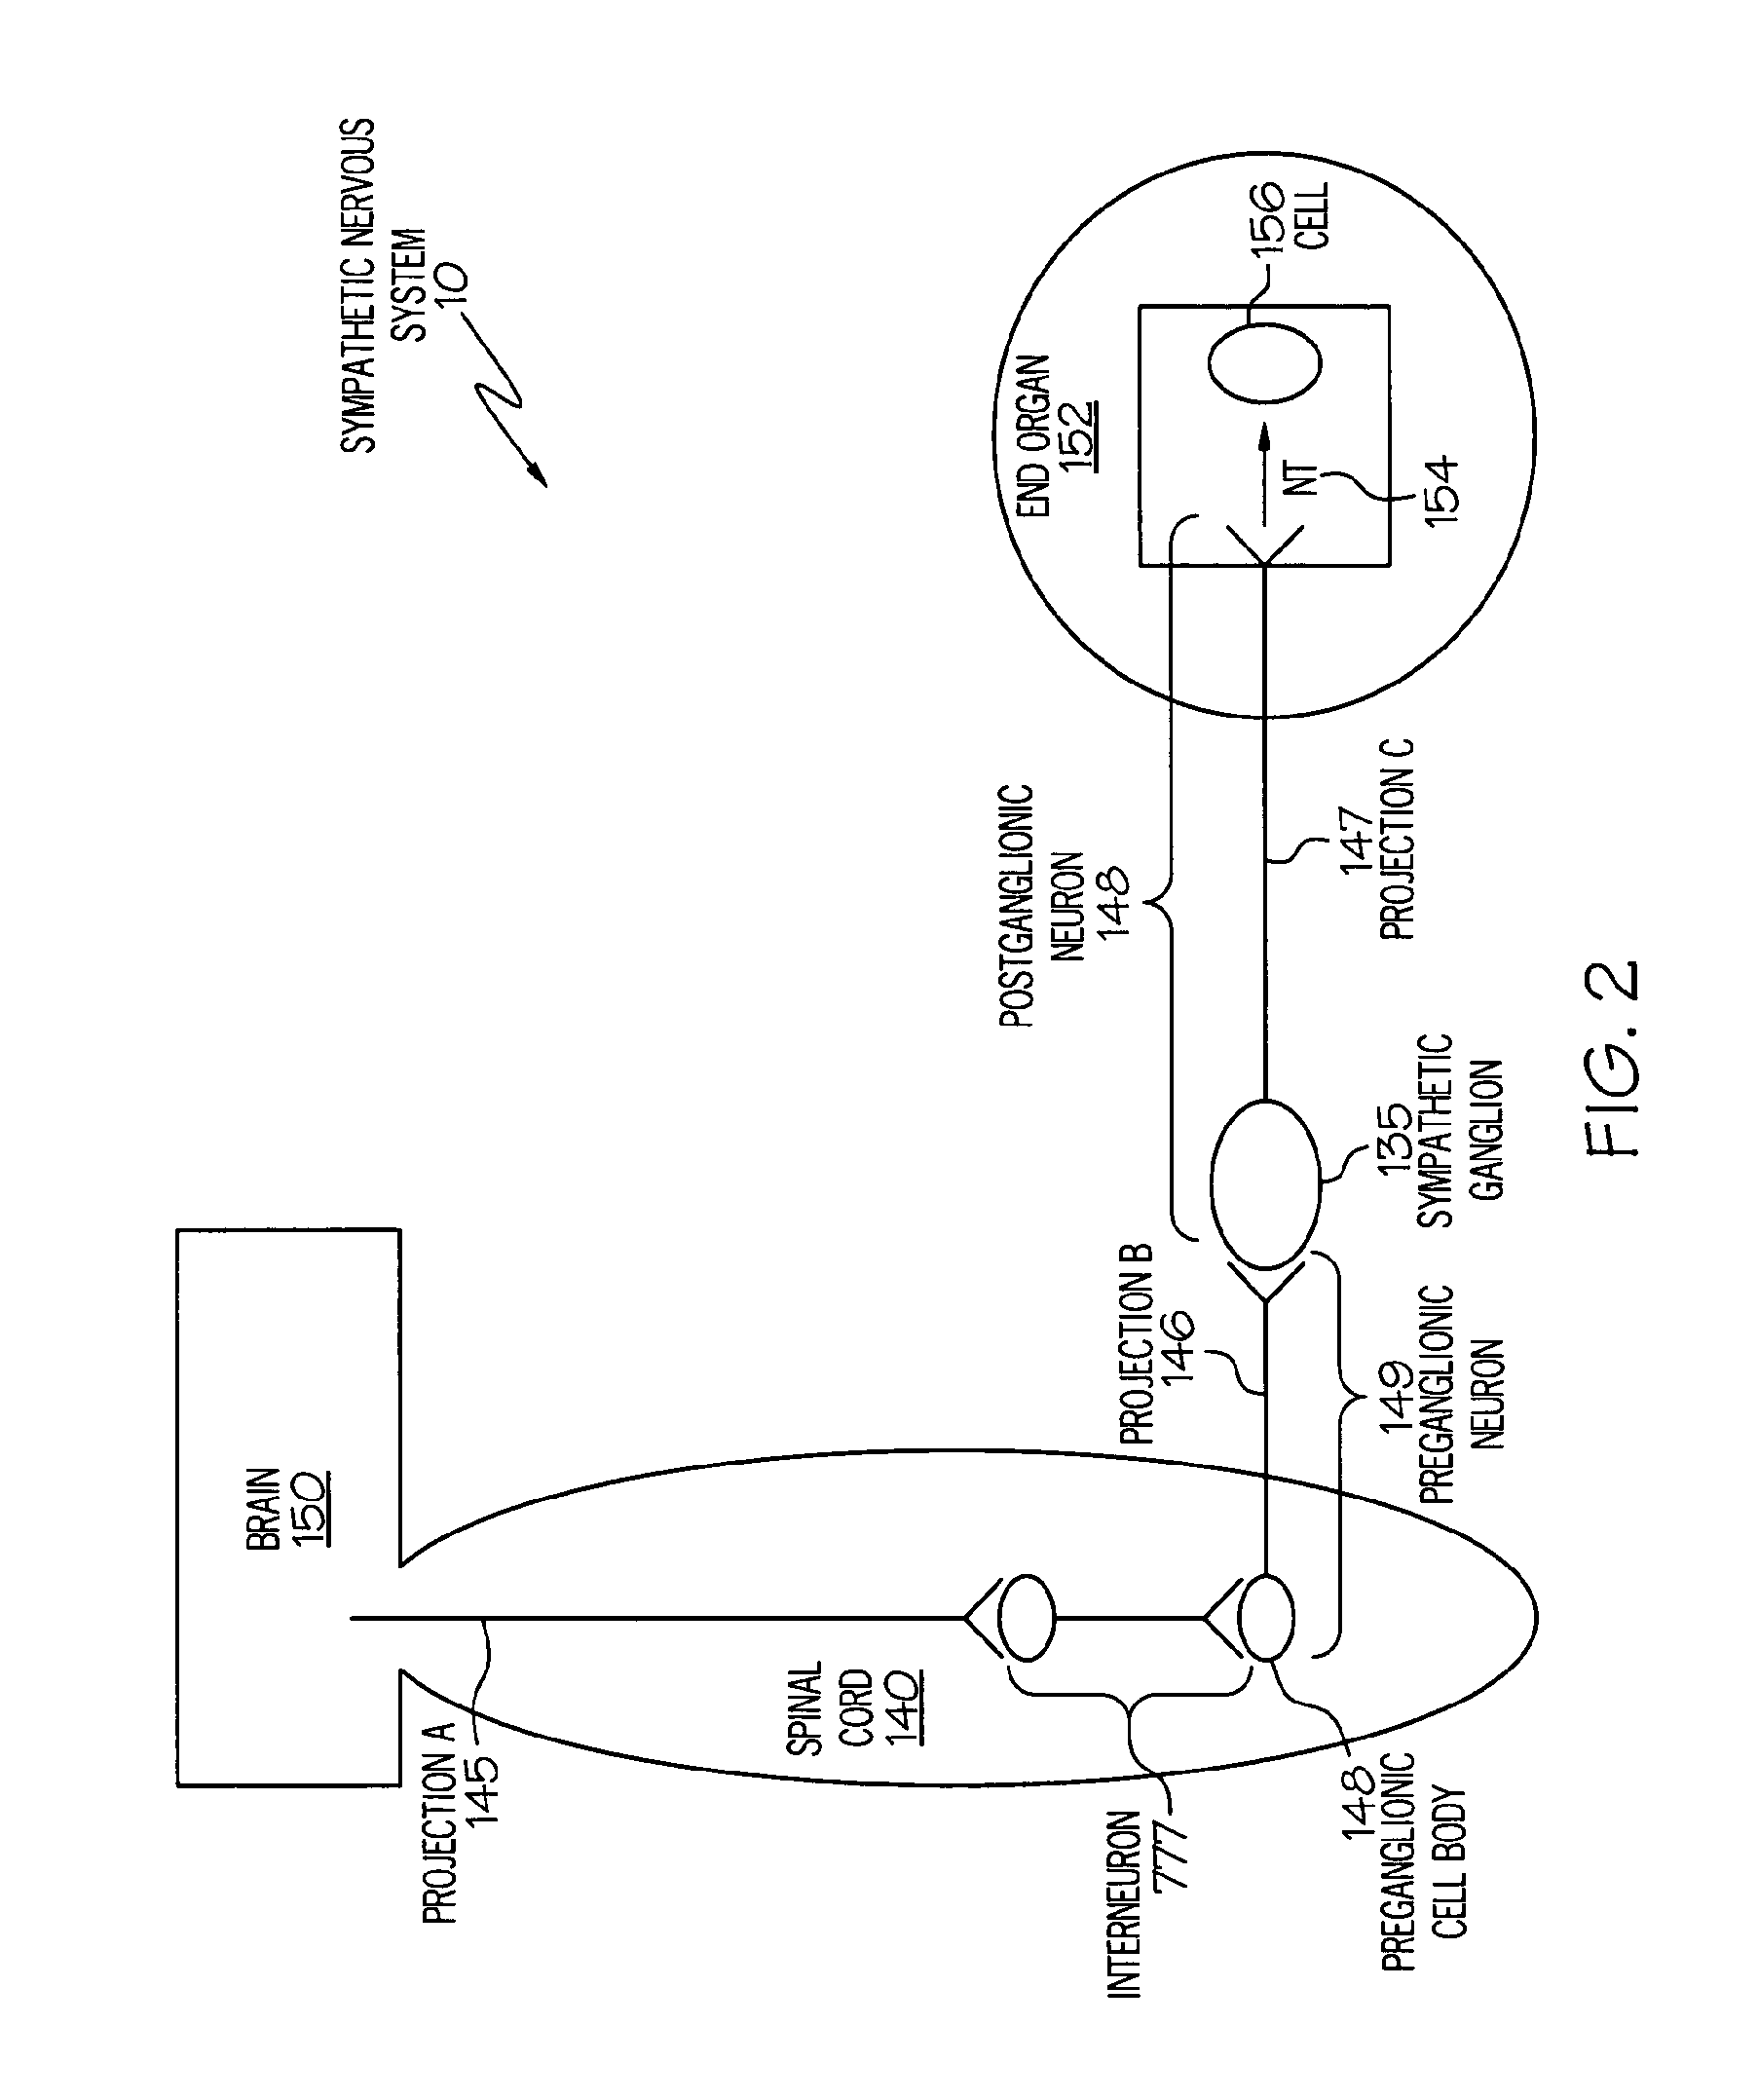 Device and method for inhibiting release of pro-inflammatory mediator